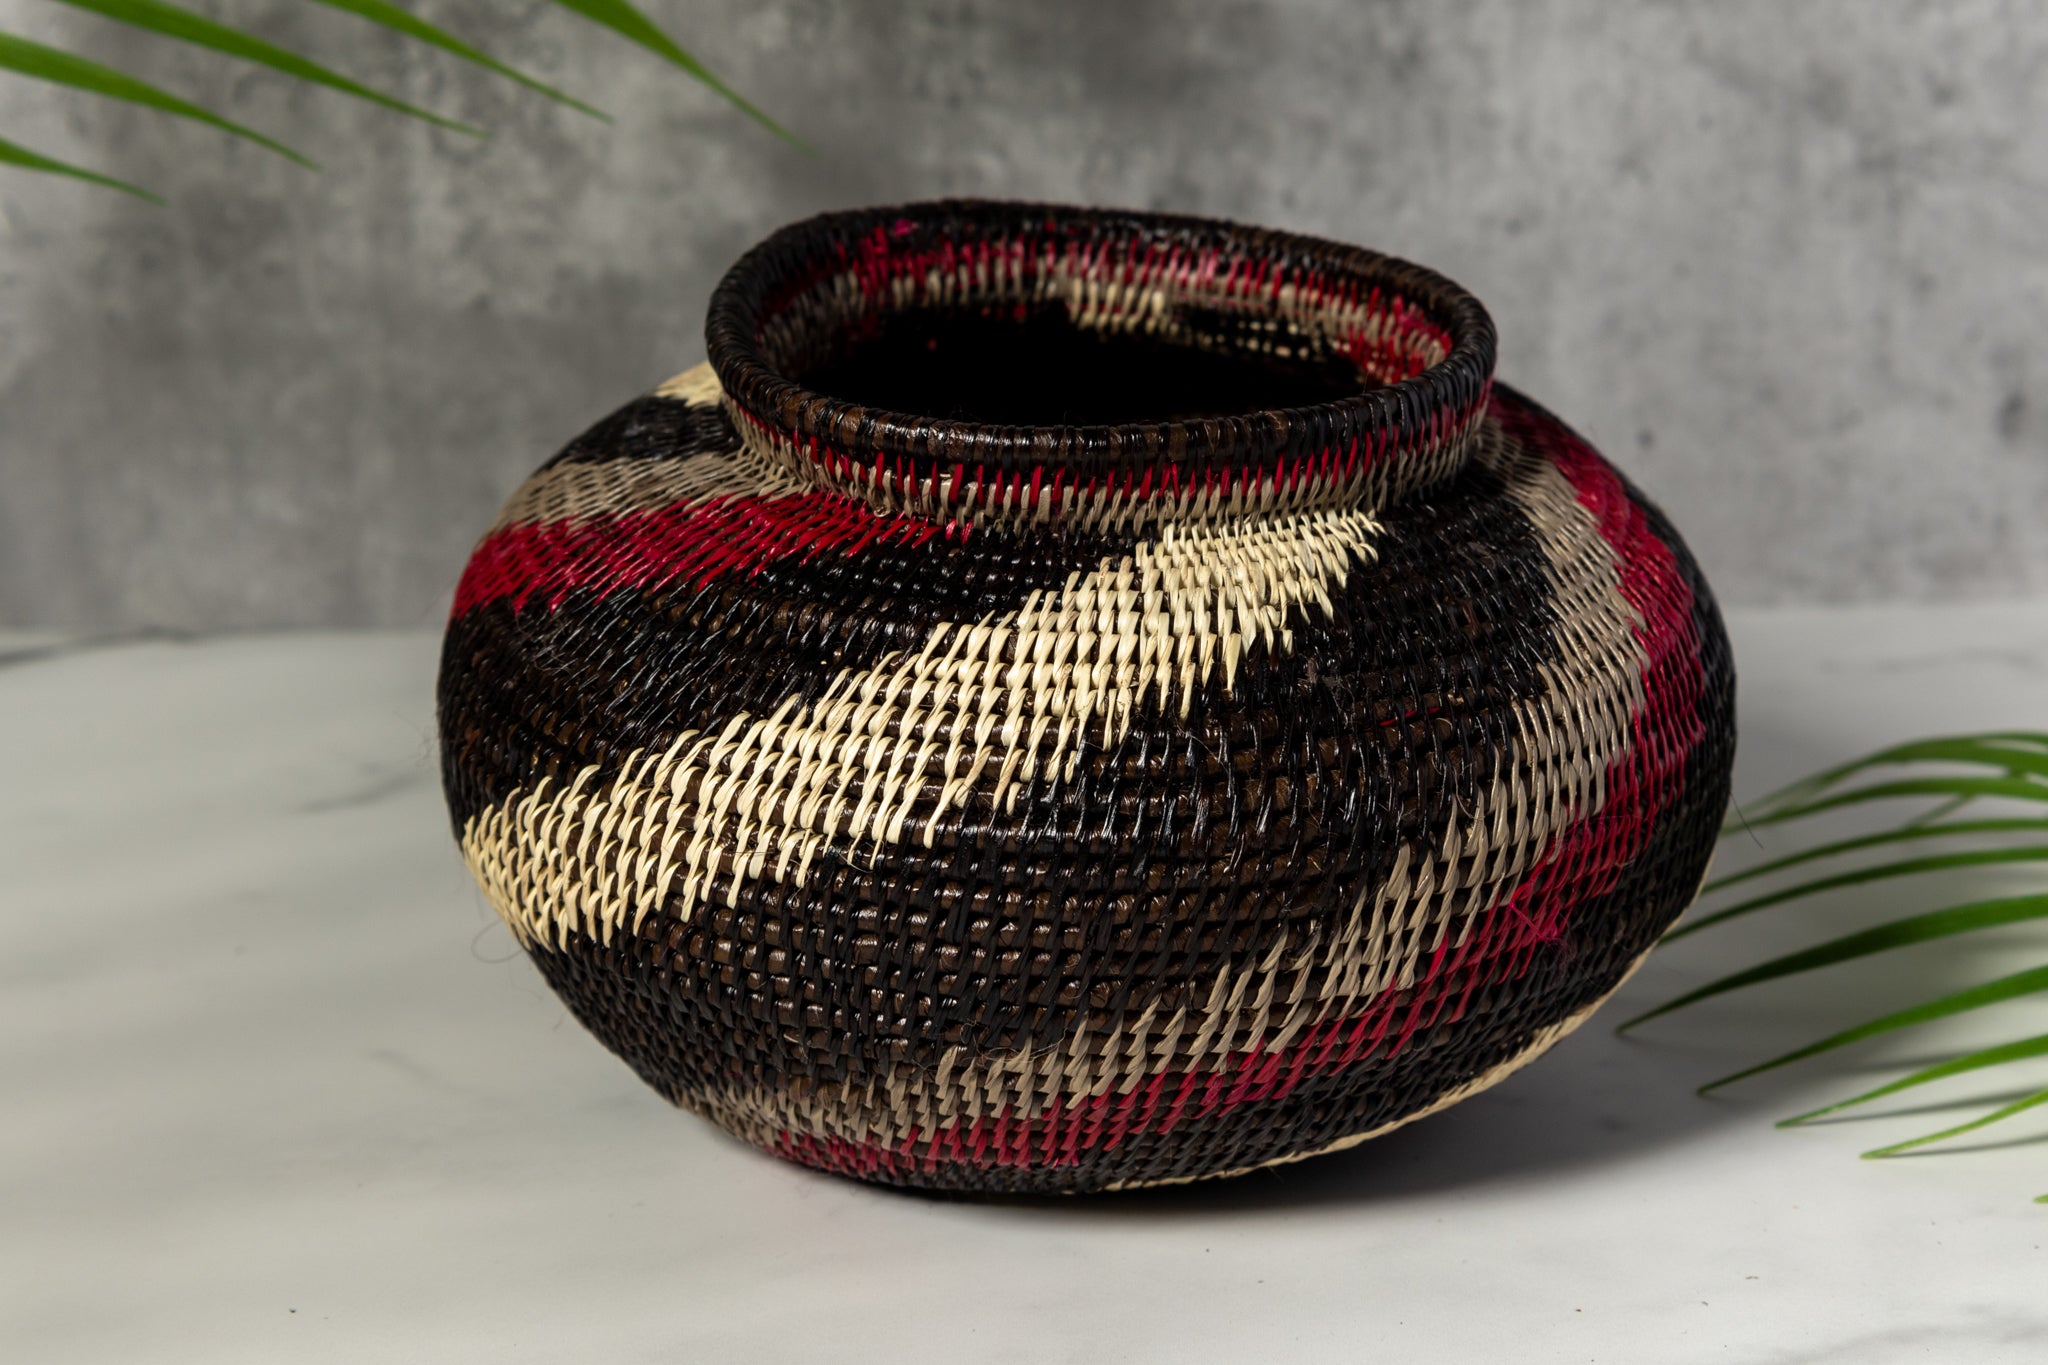 Black White And Red Spiral Woven Basket